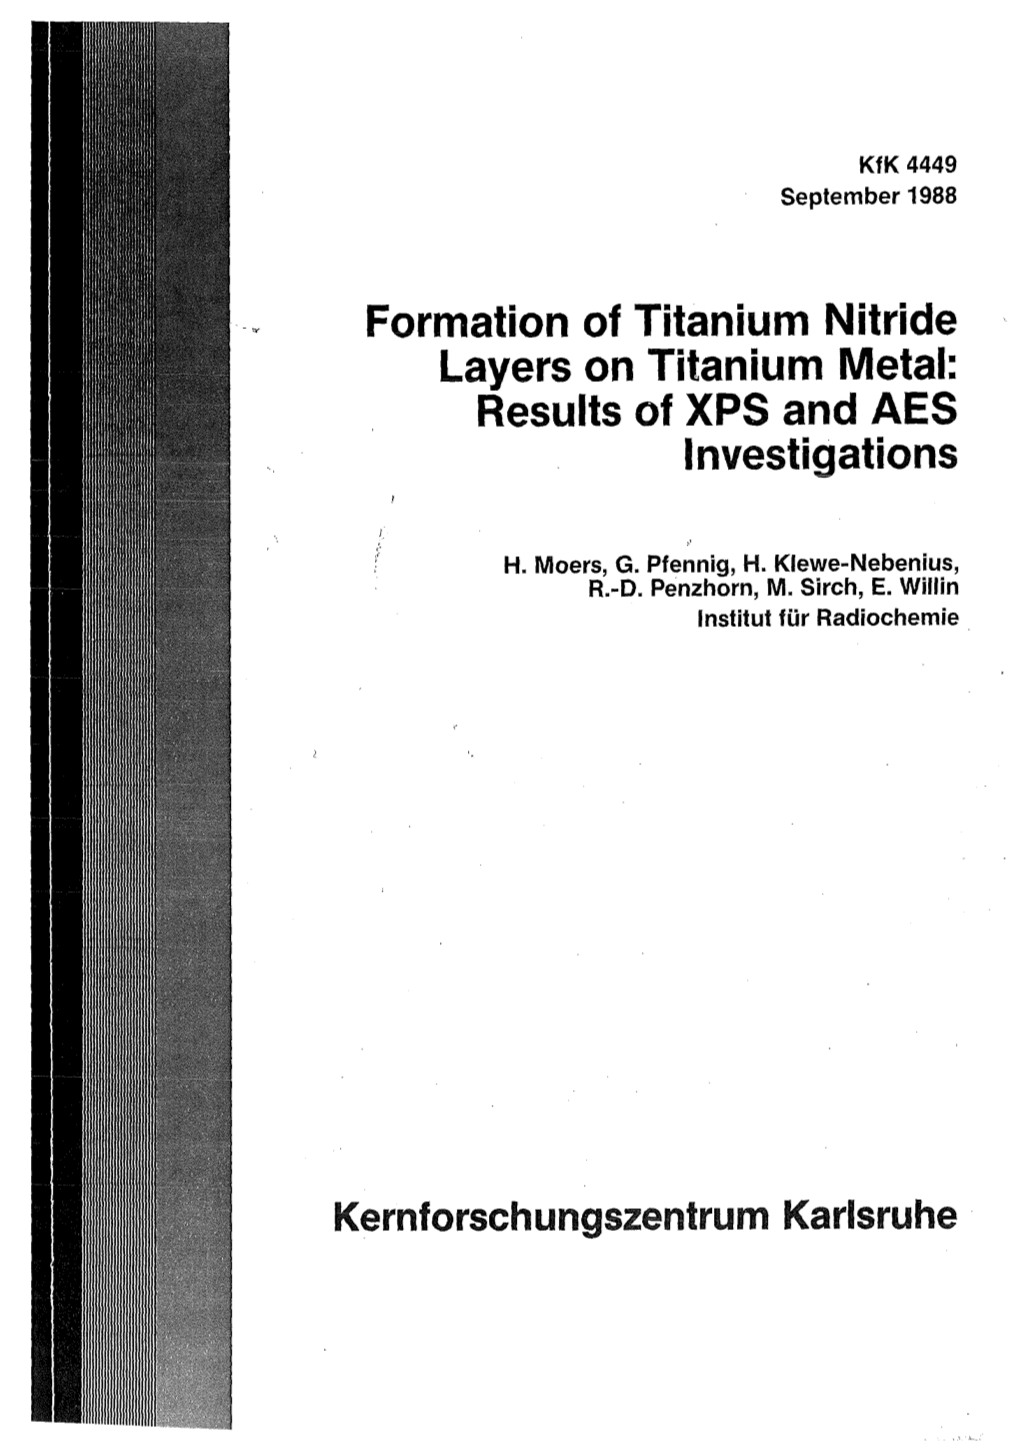 Formation of Titanium Nitride Layers on Titanium Metal: Results of XPS and AES I Nvestigations